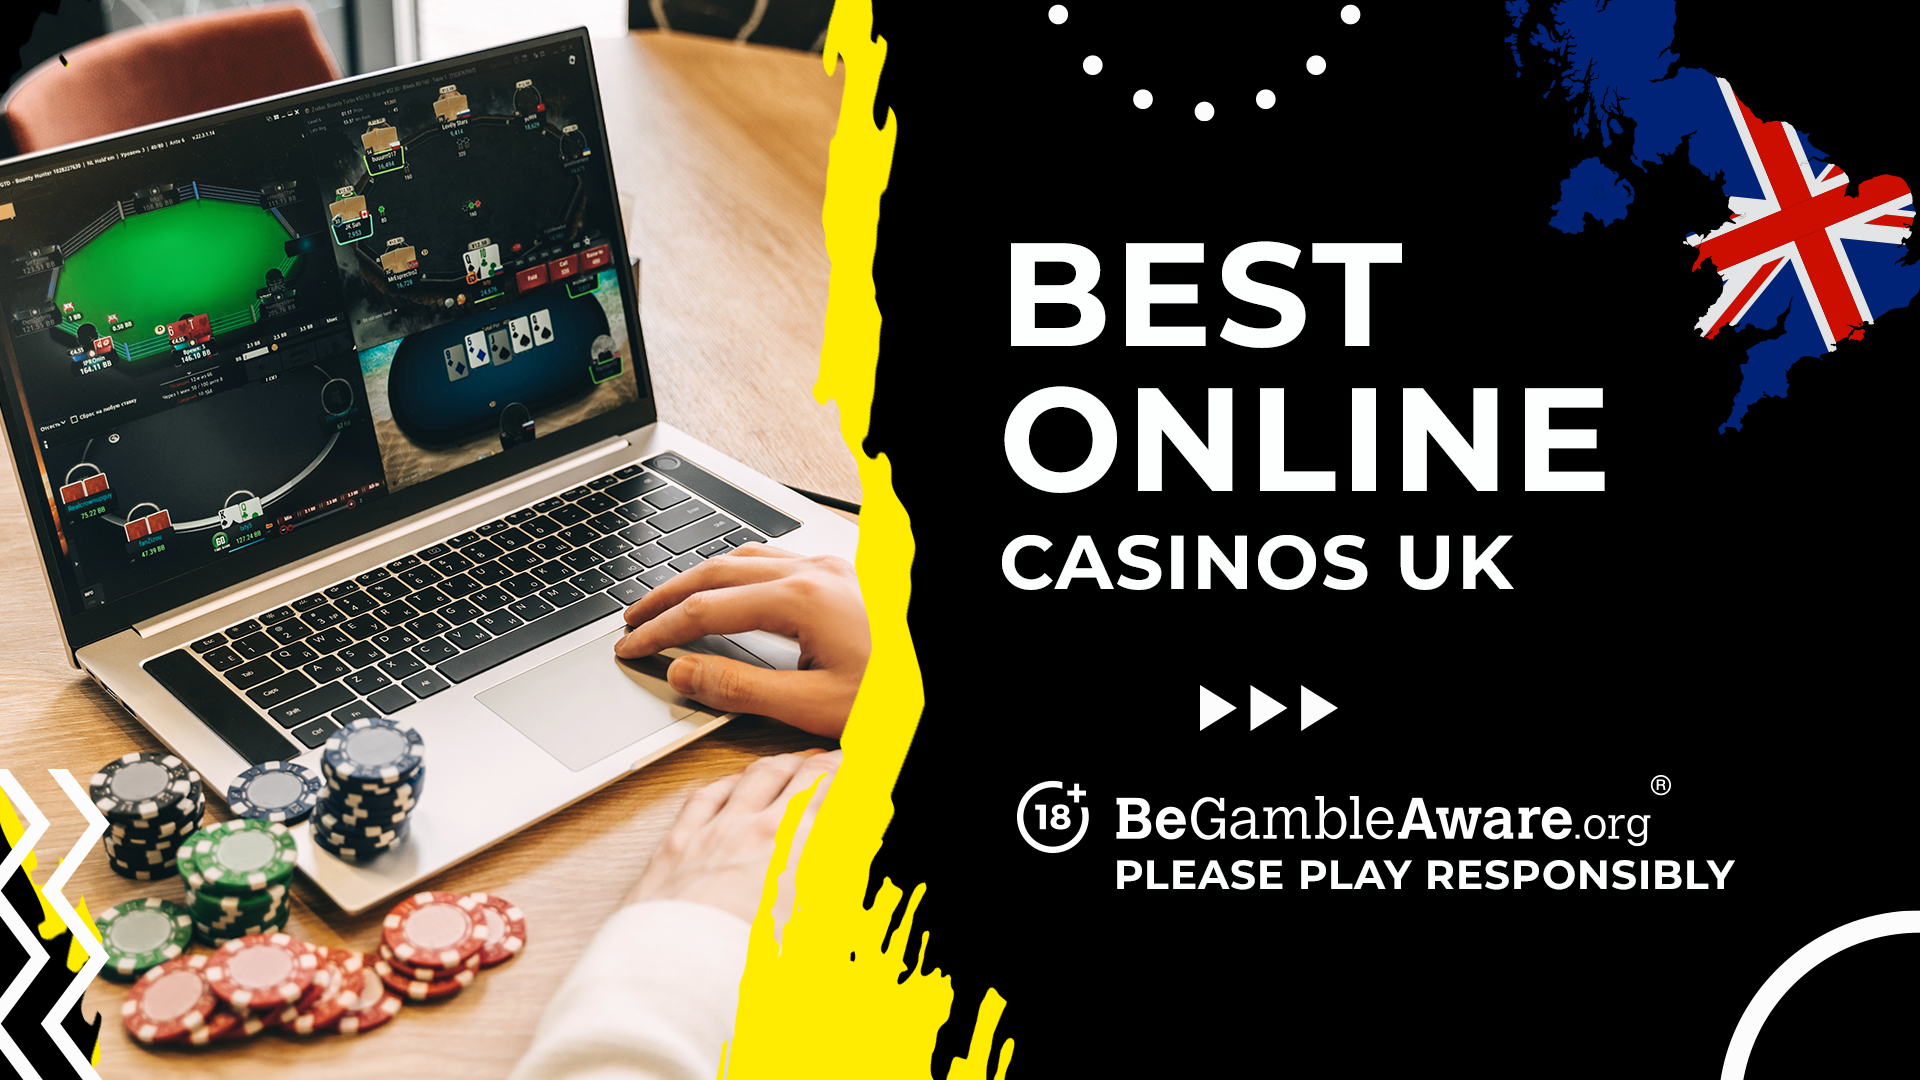 Top 10 Tips To Grow Your LVbet Casino: Your Ultimate Destination for Online Gaming Excitement